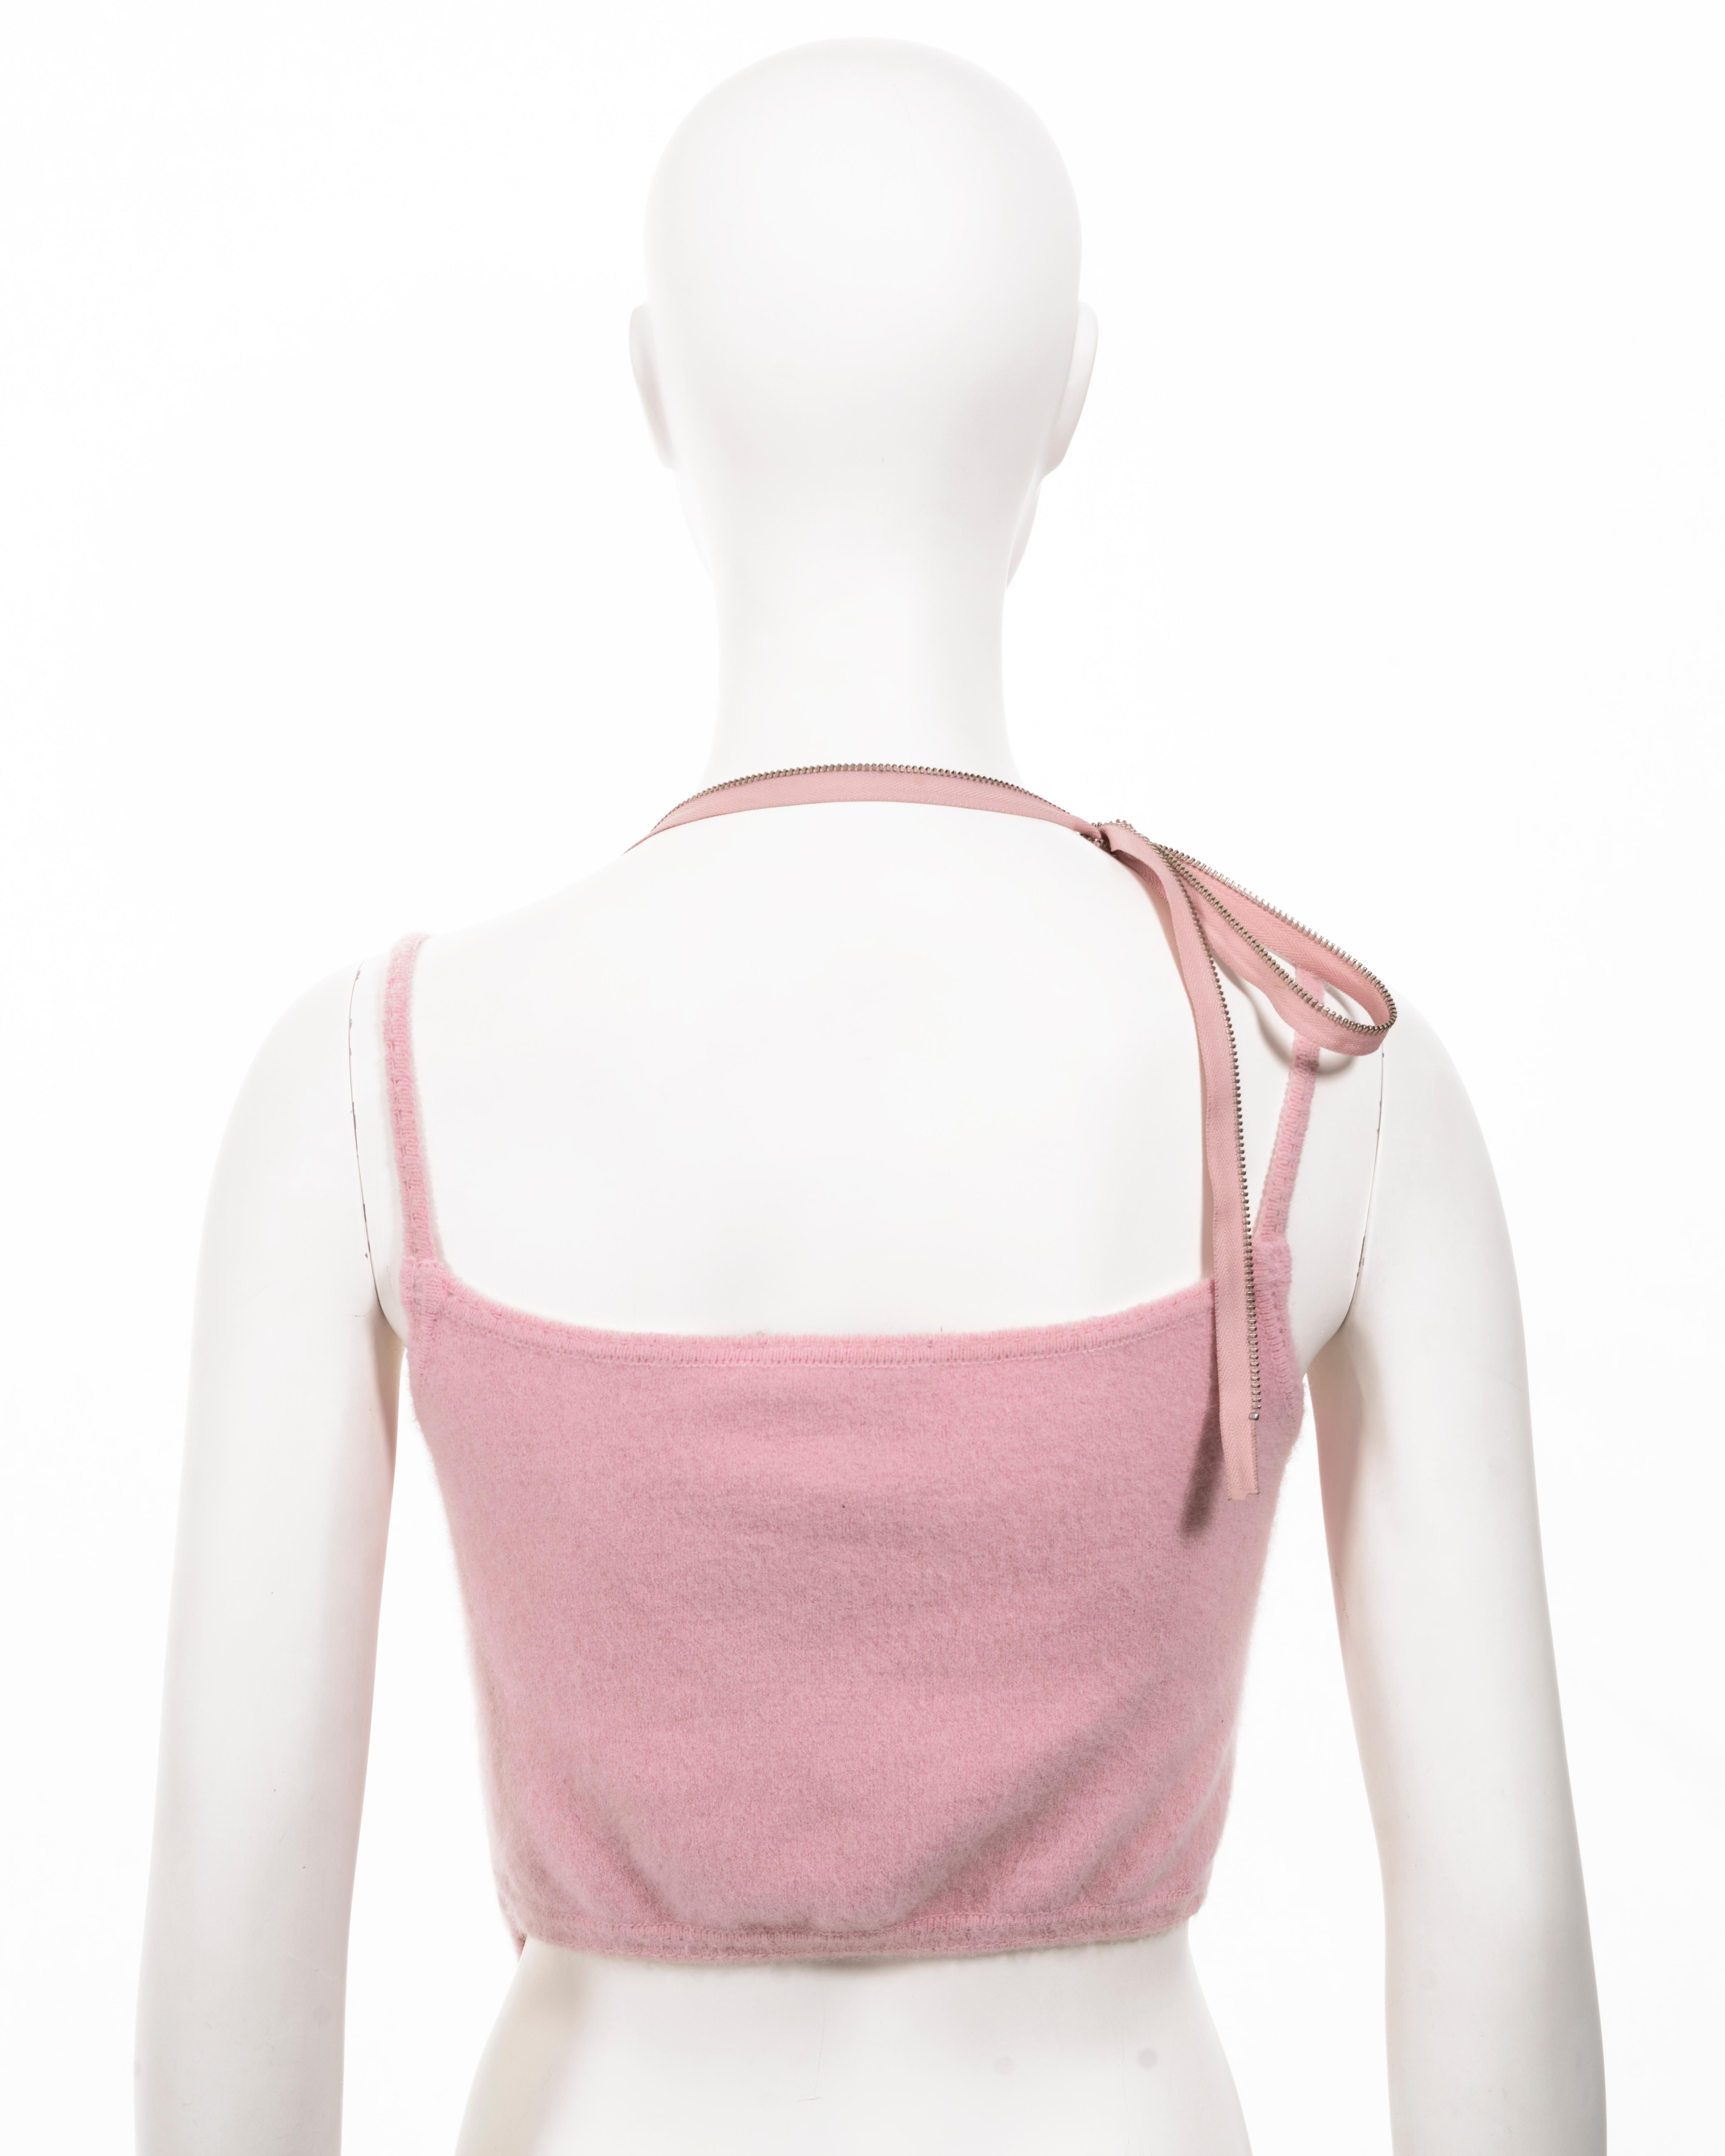 John Galliano baby pink fuzzy knitted crop top with zippers, ss 2000 For Sale 4